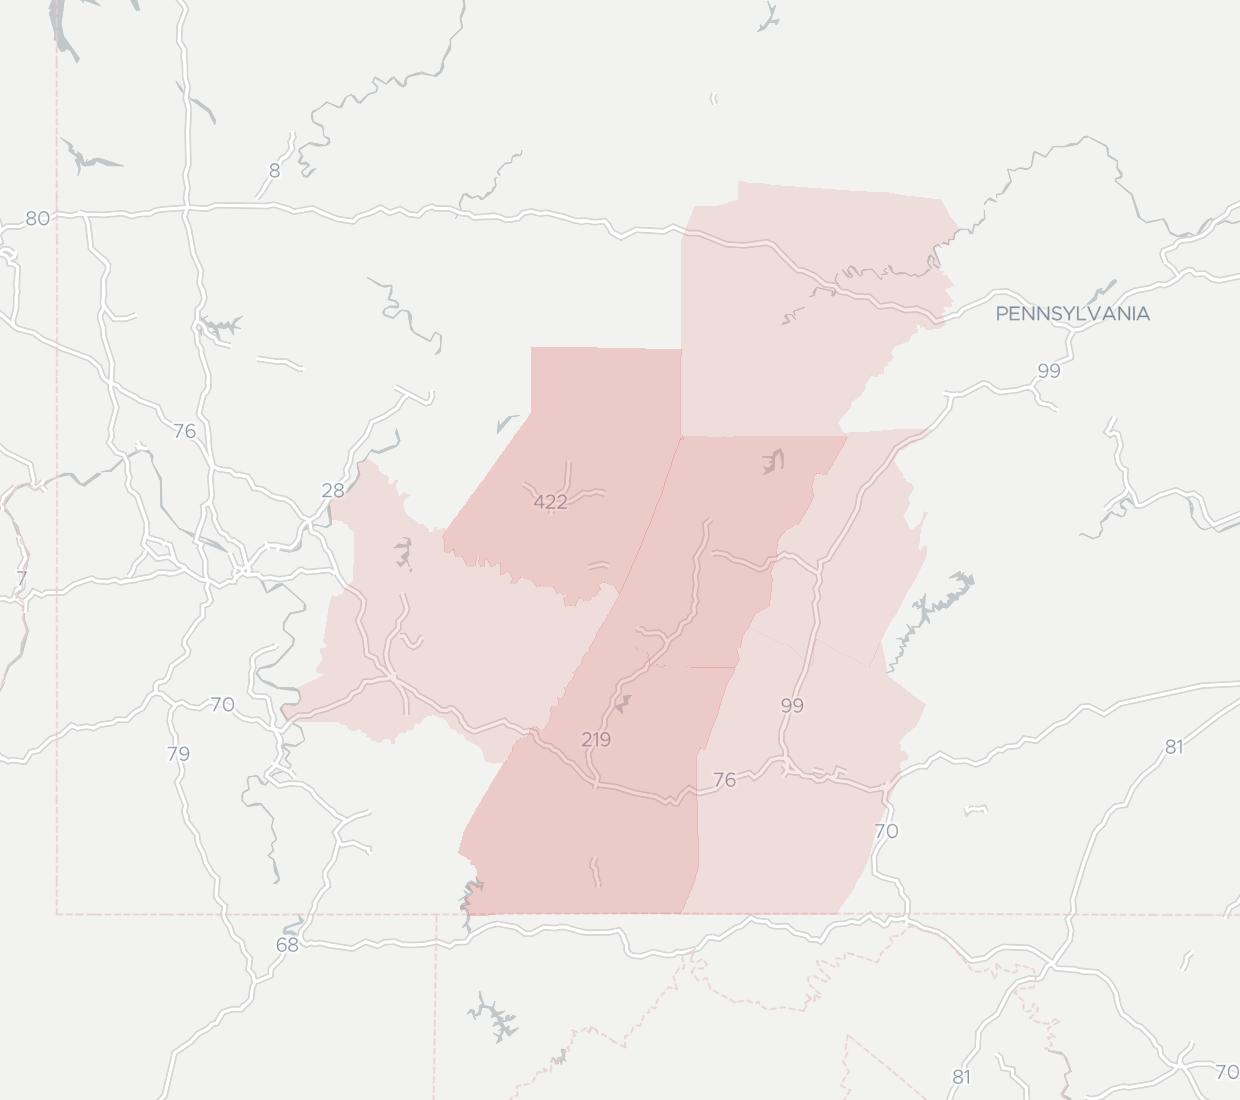 In the Stix Broadband Coverage Map